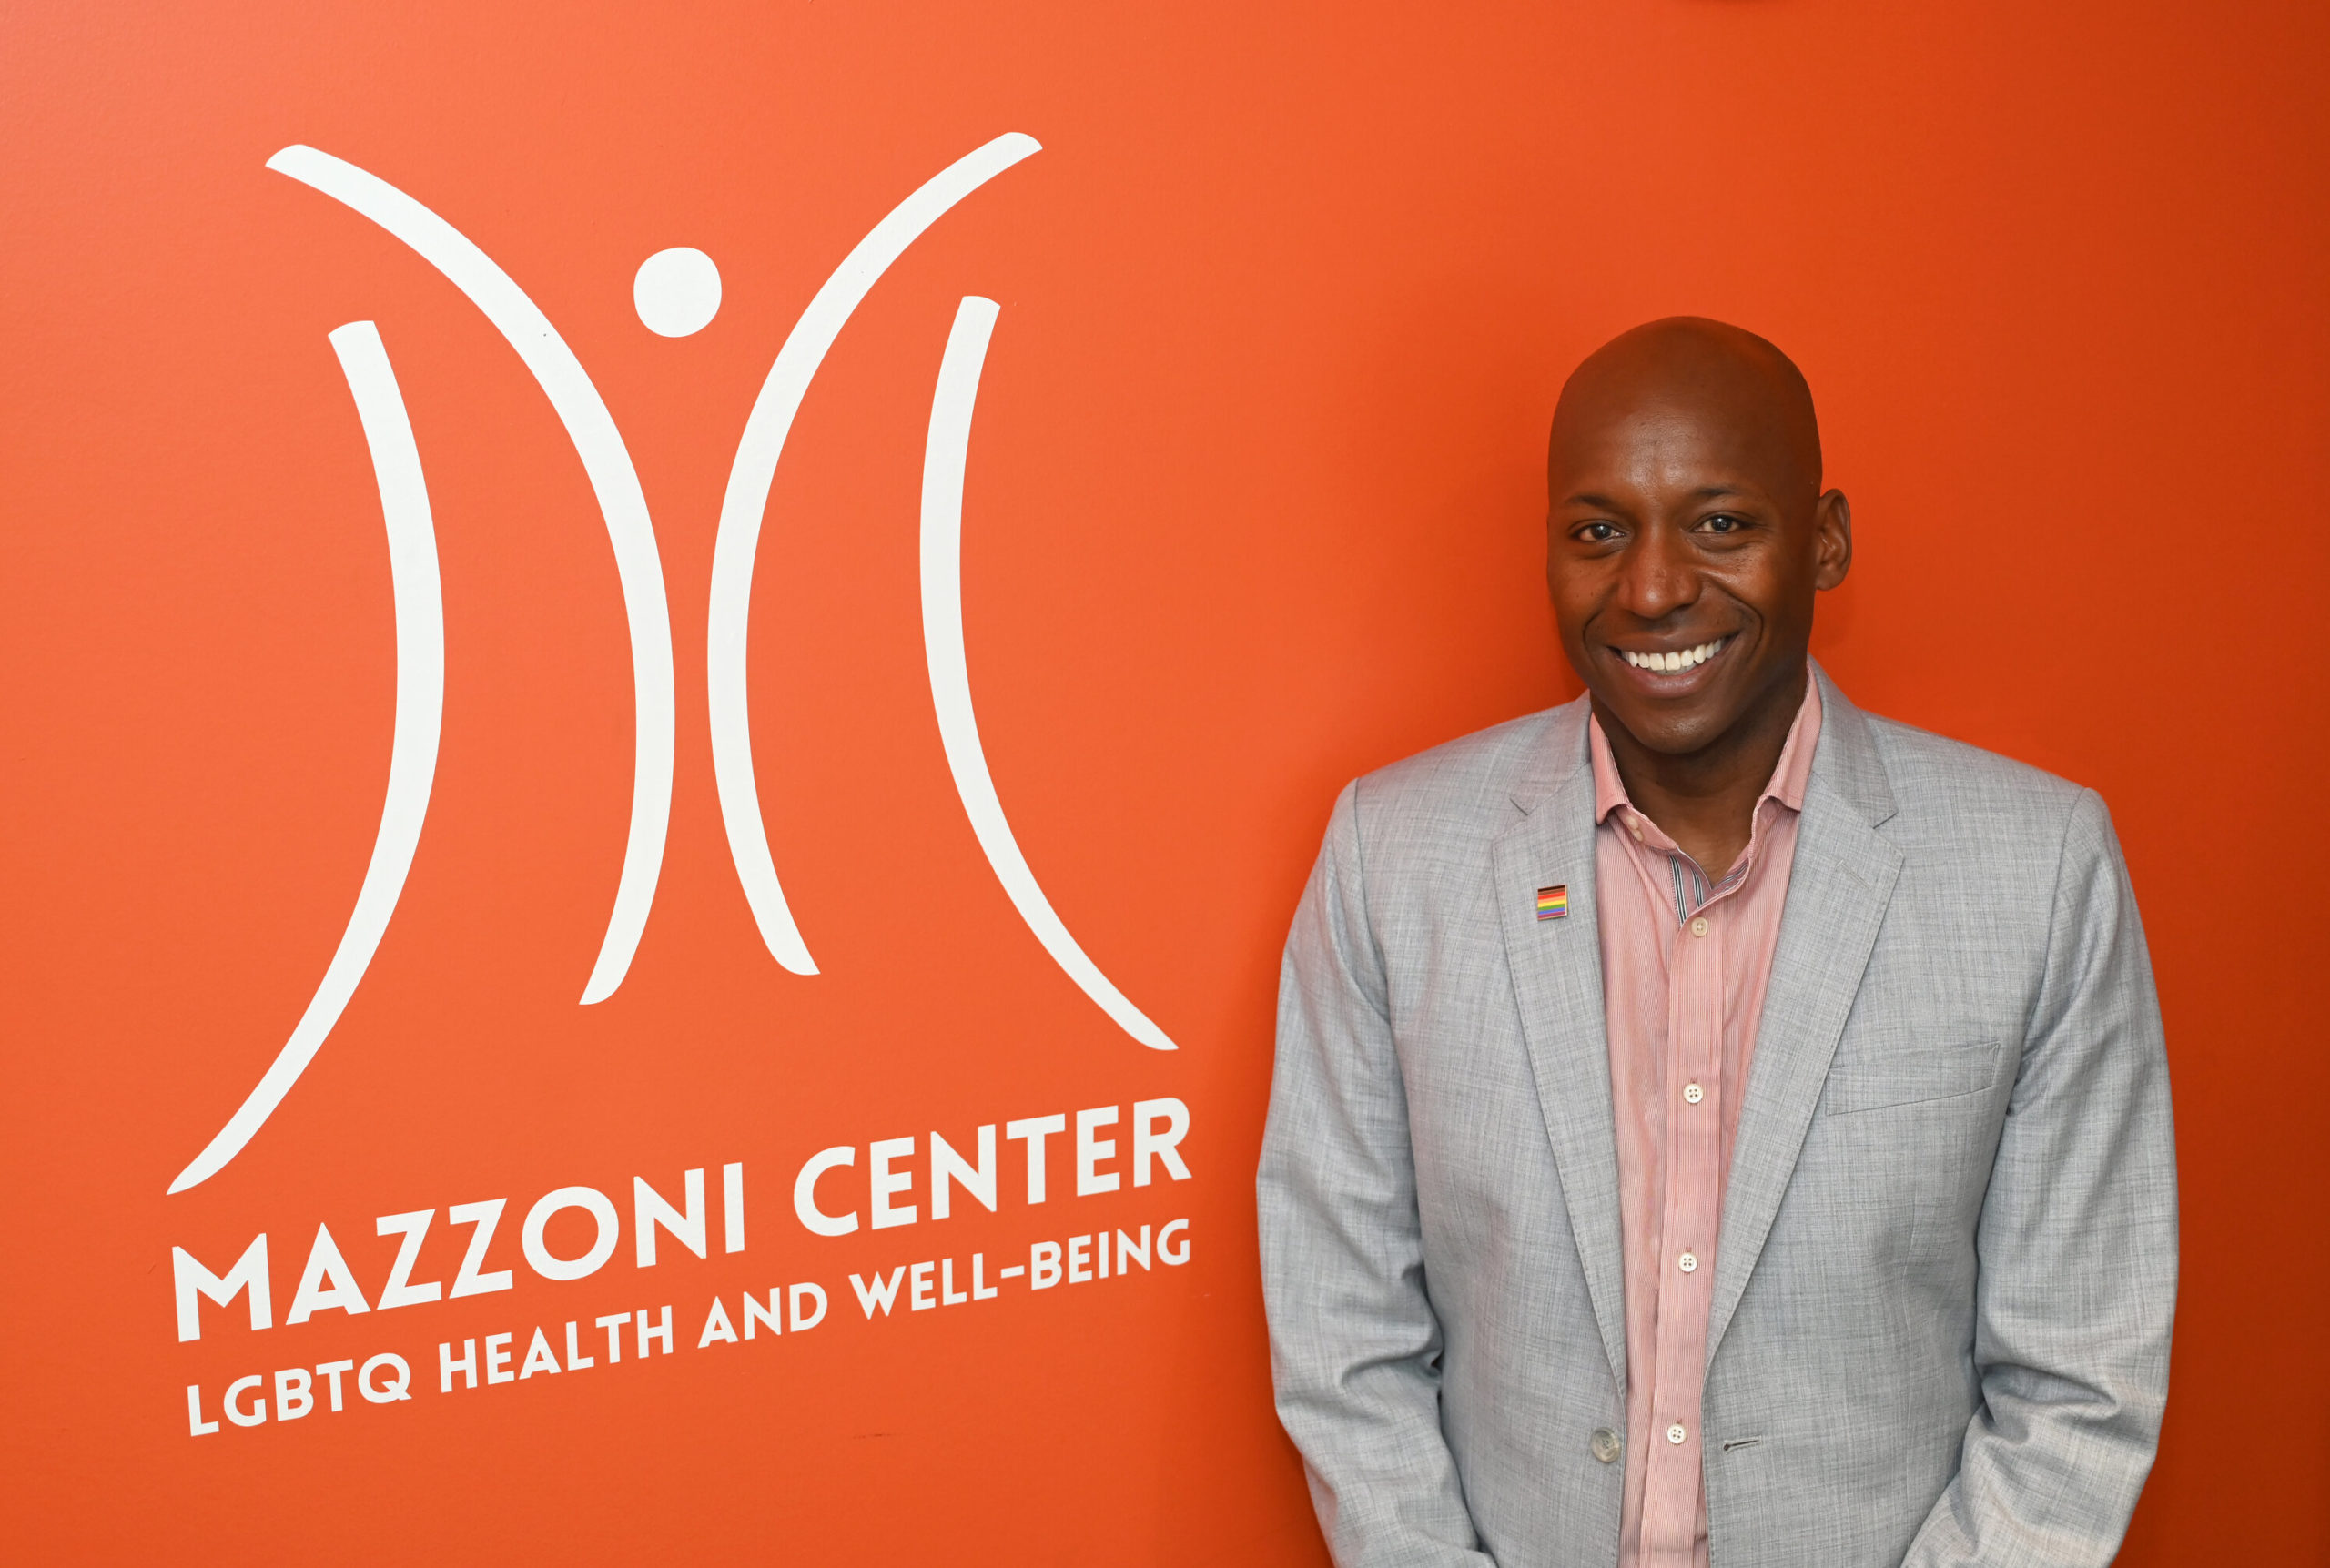 Sultan Shakir, the newest President and Executive Officer of the Mazzoni Center, standing in front of an orange wall with the Mazzoni Center logo. Underneath the logo is text that reads: Mazzoni Center LGBTQ Health and Well-Being.